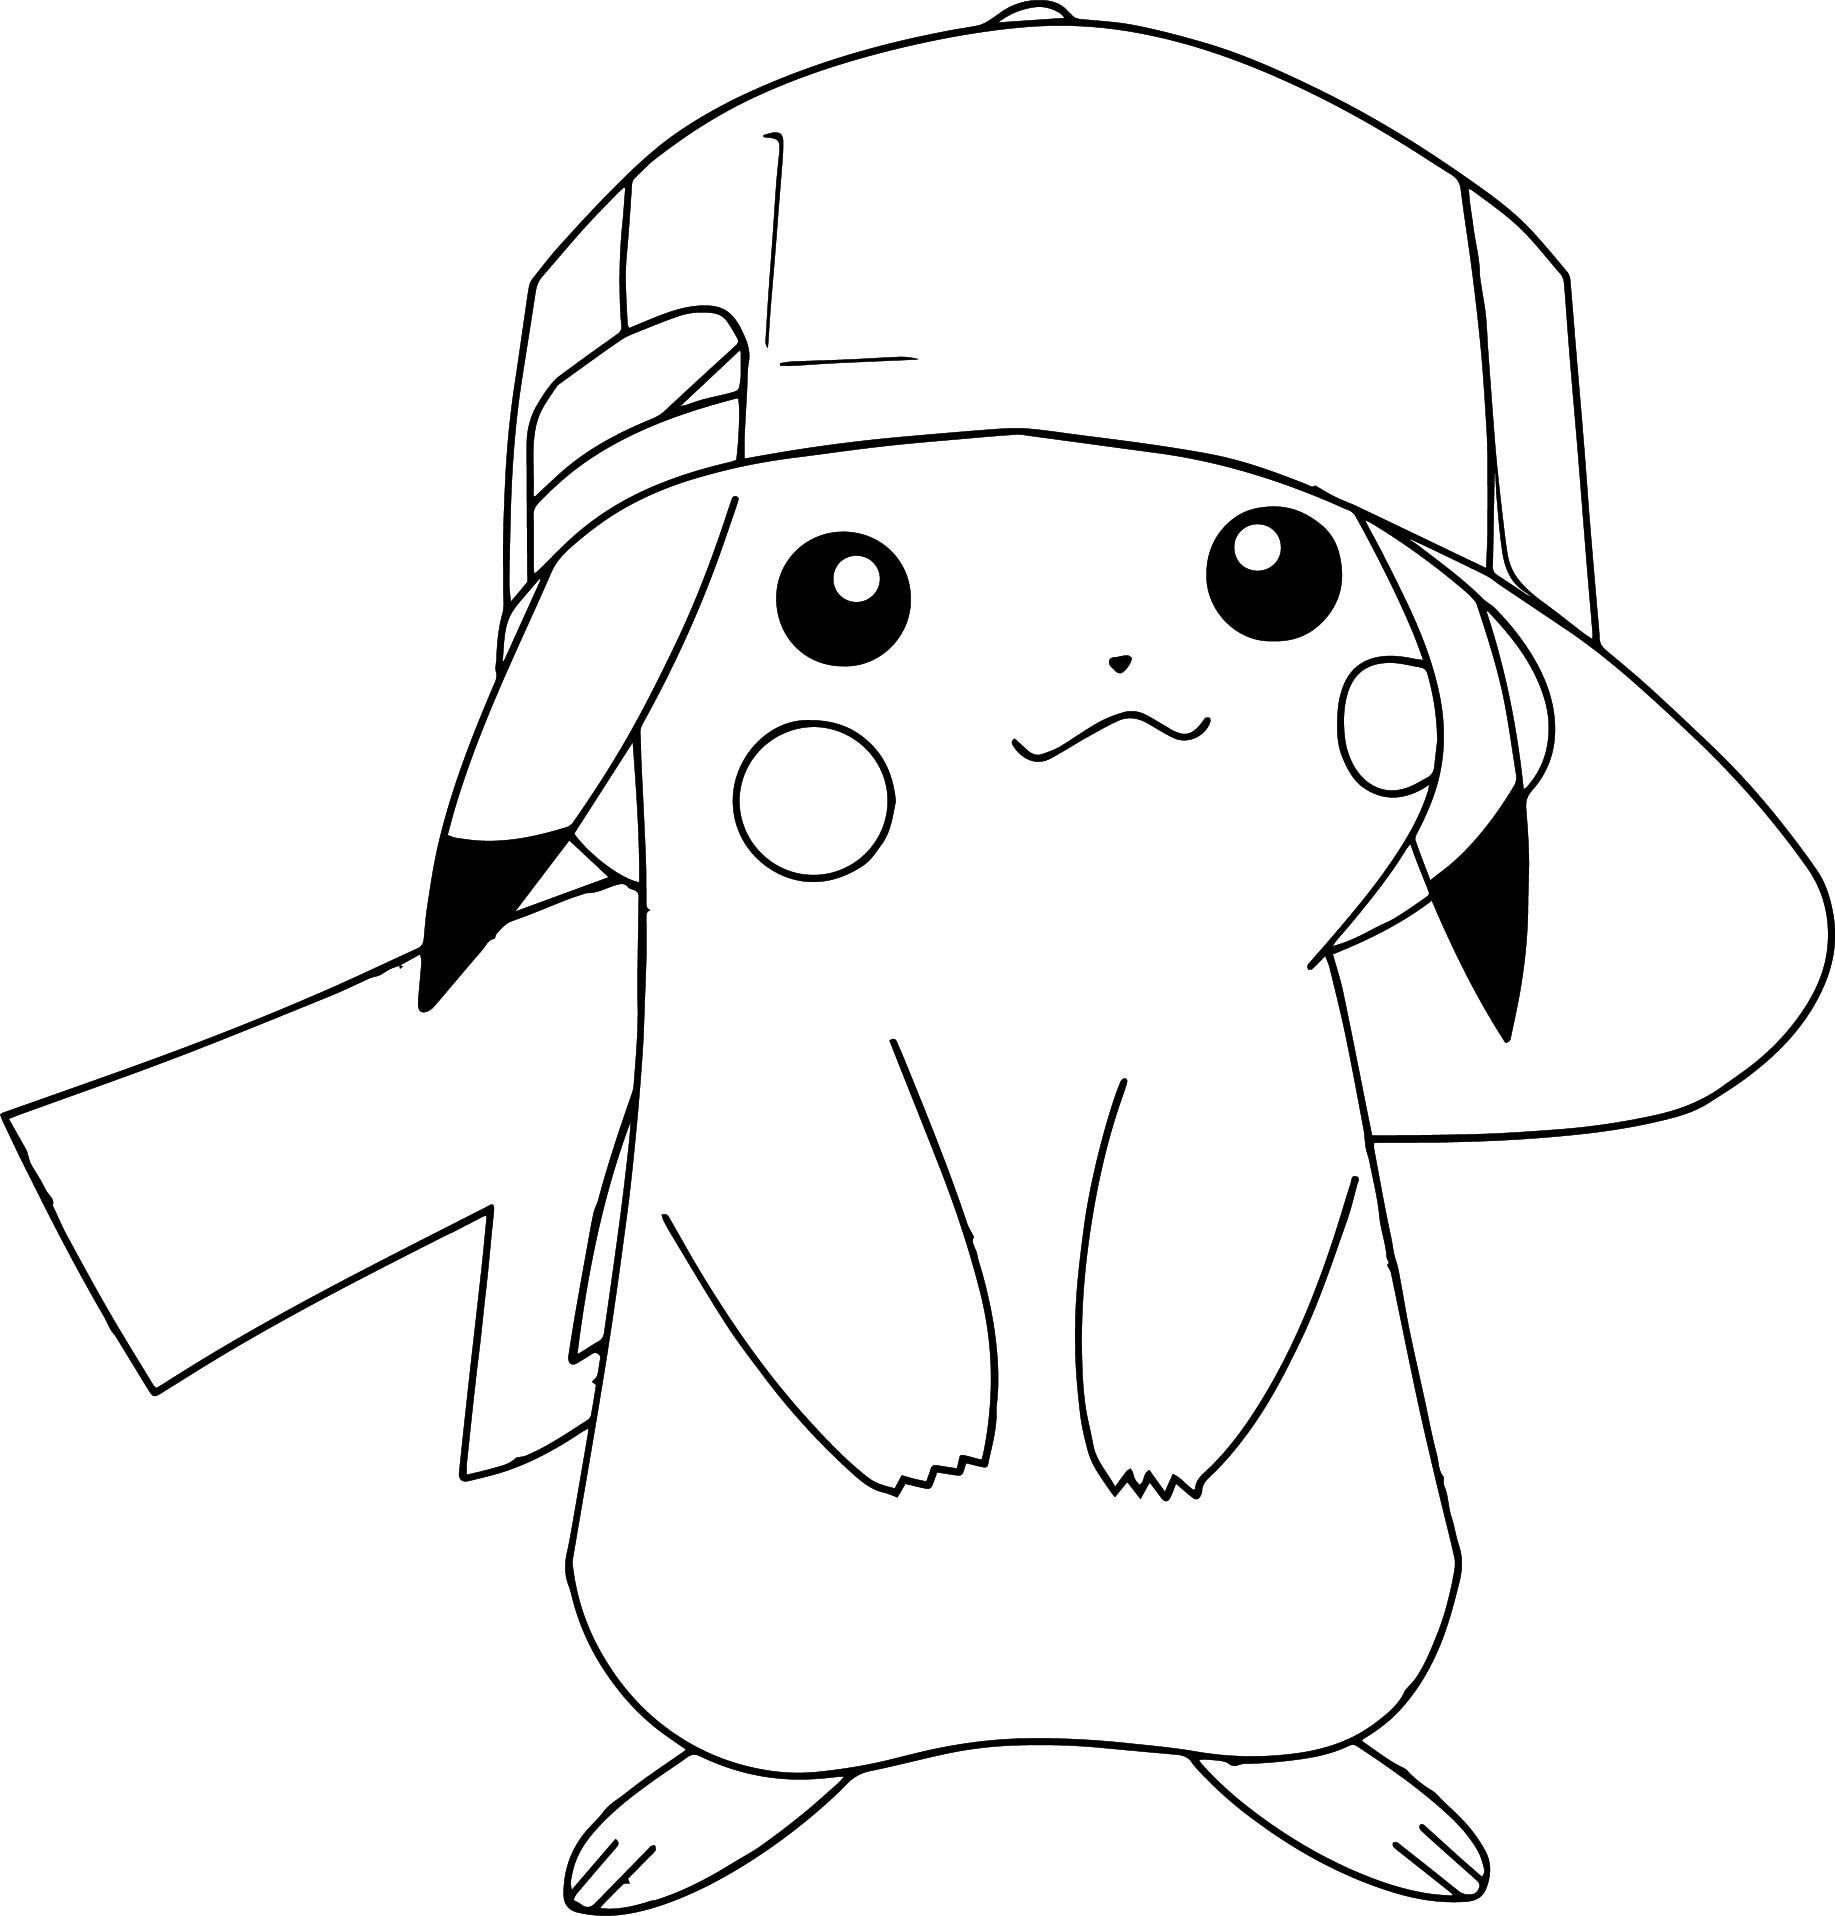 Pokemon Coloring Pages Pikachu Cute